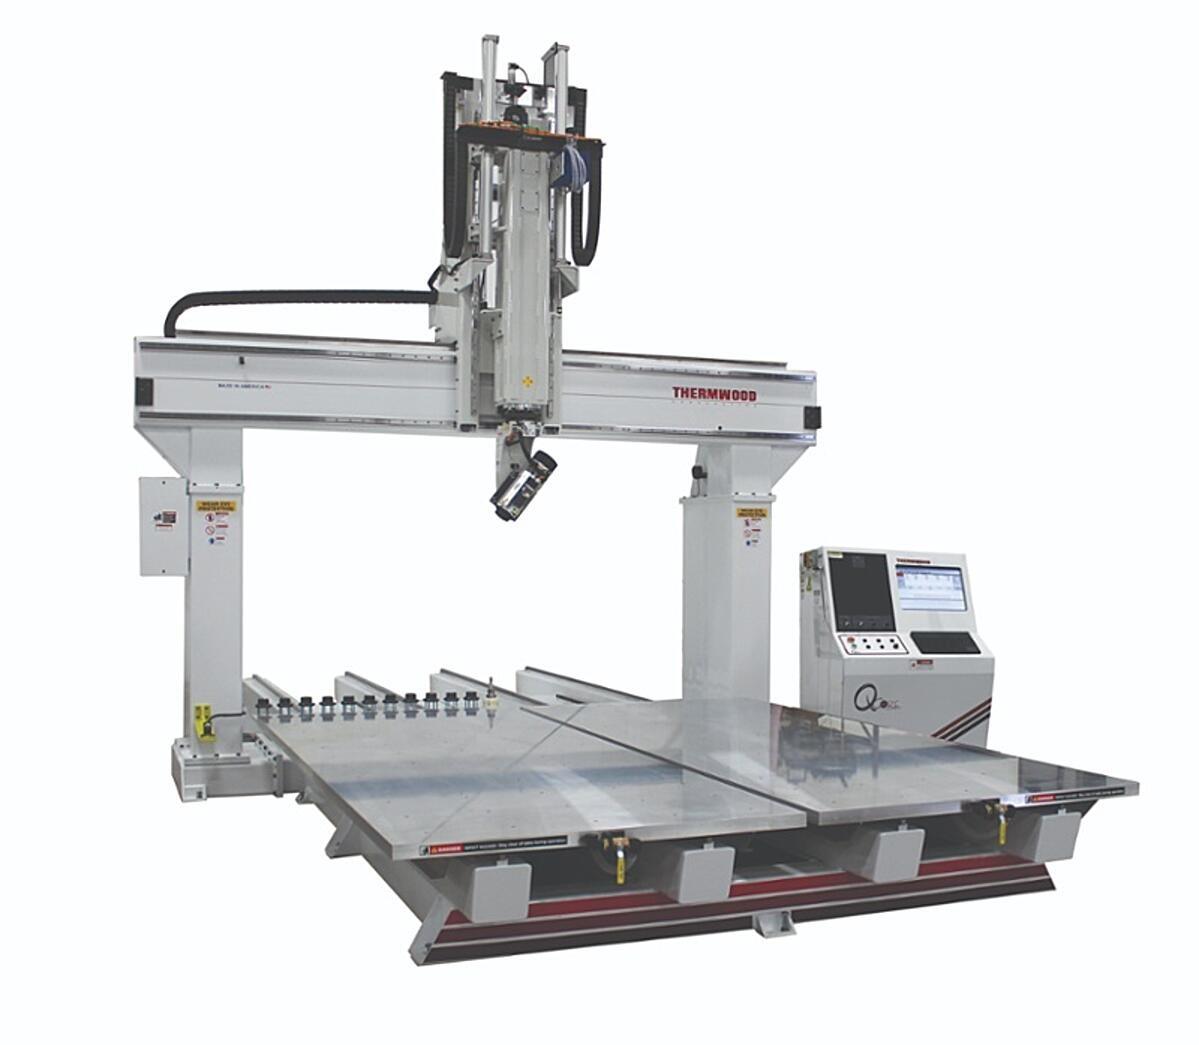 Thermwood Model 90 CNC router